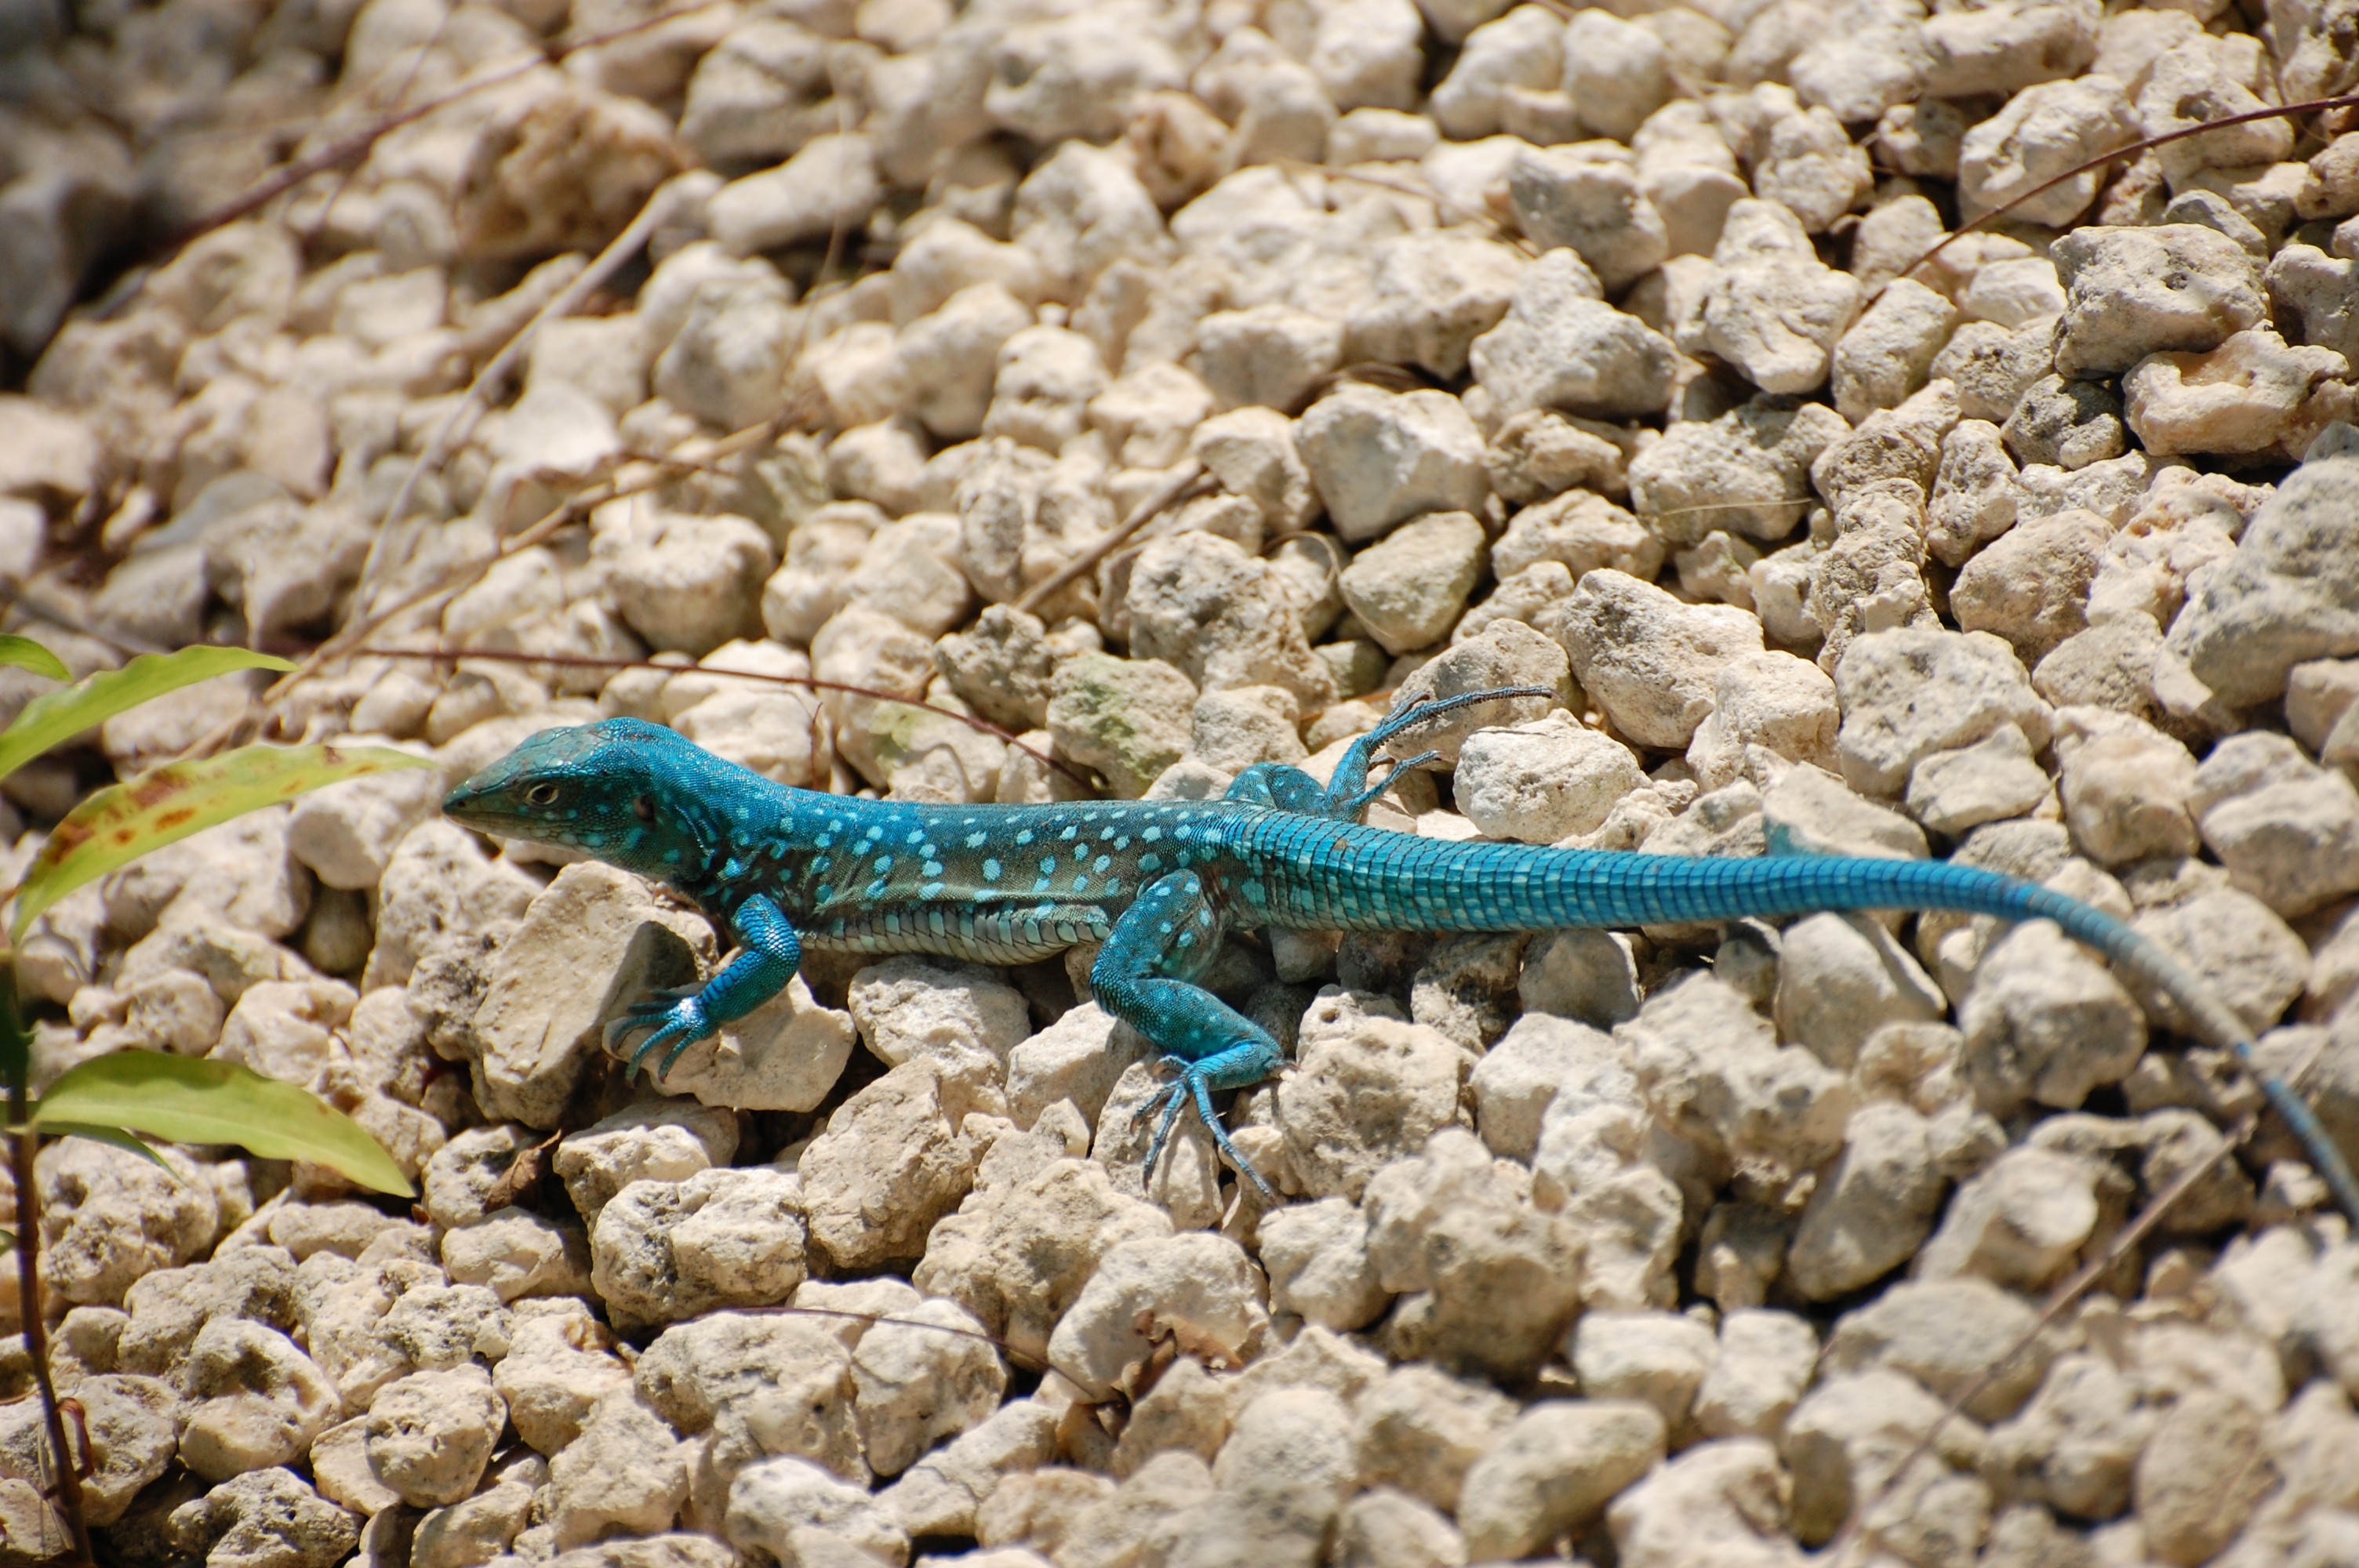 General 3008x2000 pebbles animals reptiles teal lizards outdoors nature